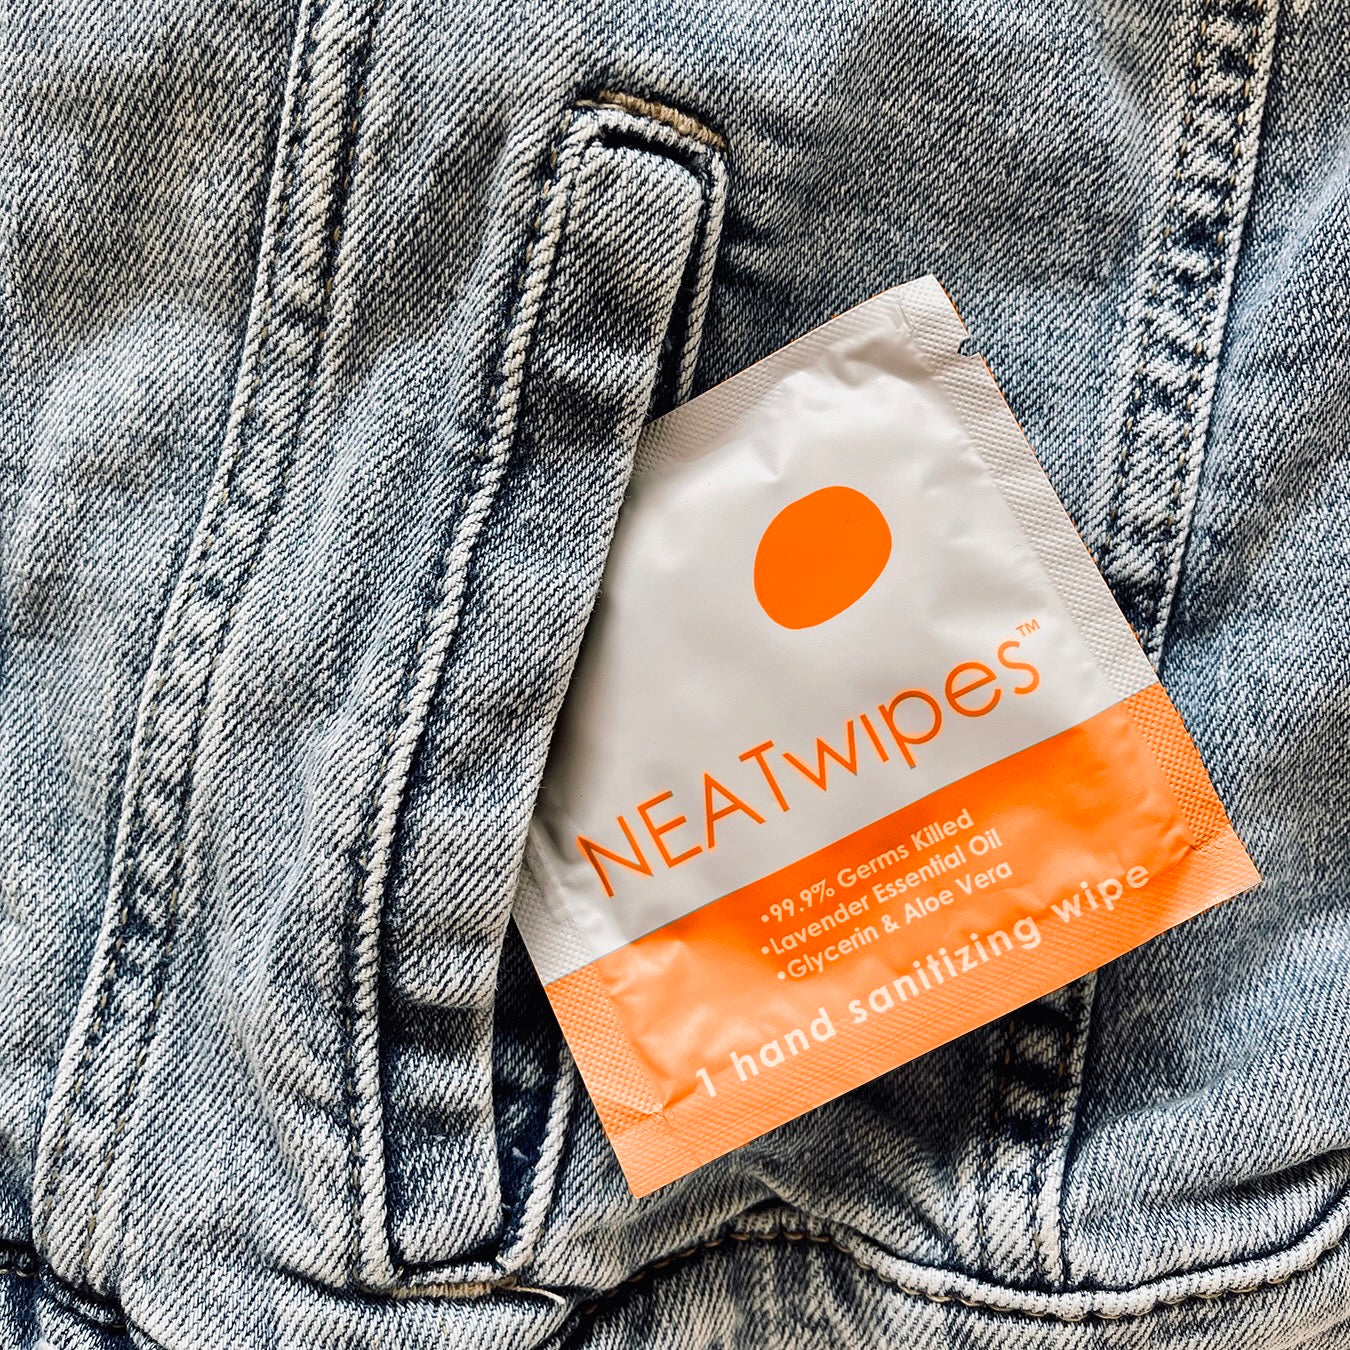 Individually wrapped NEATwipes Fresh Citrus hand wipe in a denim jean pocket.